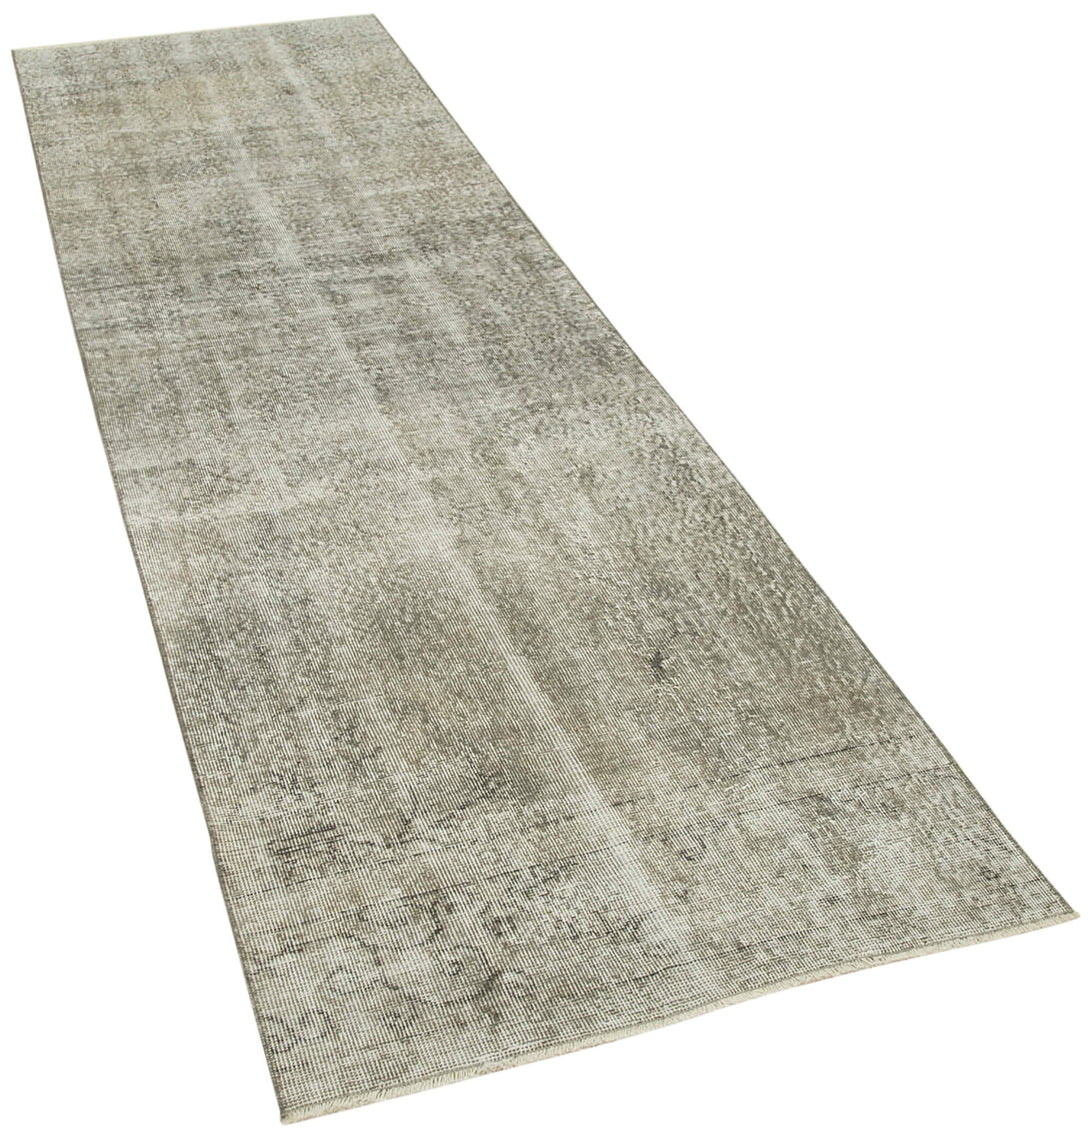 Handmade Overdyed Runner > Design# OL-AC-38159 > Size: 3'-0" x 10'-6", Carpet Culture Rugs, Handmade Rugs, NYC Rugs, New Rugs, Shop Rugs, Rug Store, Outlet Rugs, SoHo Rugs, Rugs in USA